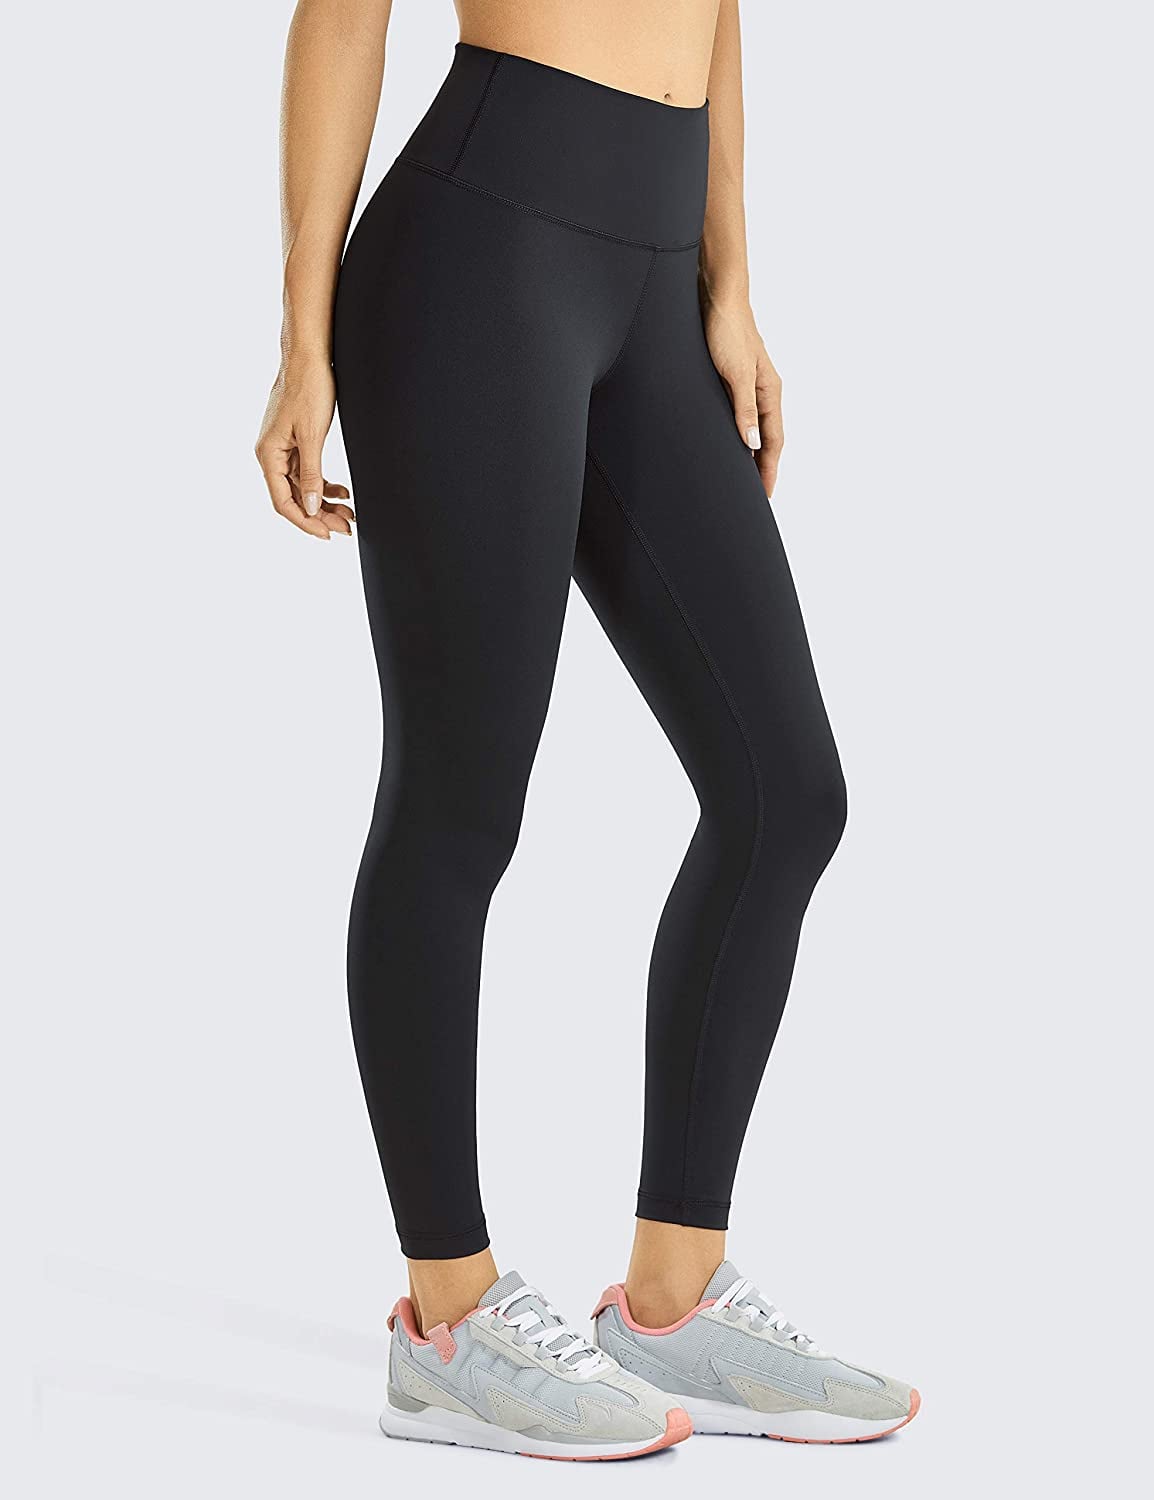 Lululemon Compression Tights Reviews For Women  International Society of  Precision Agriculture